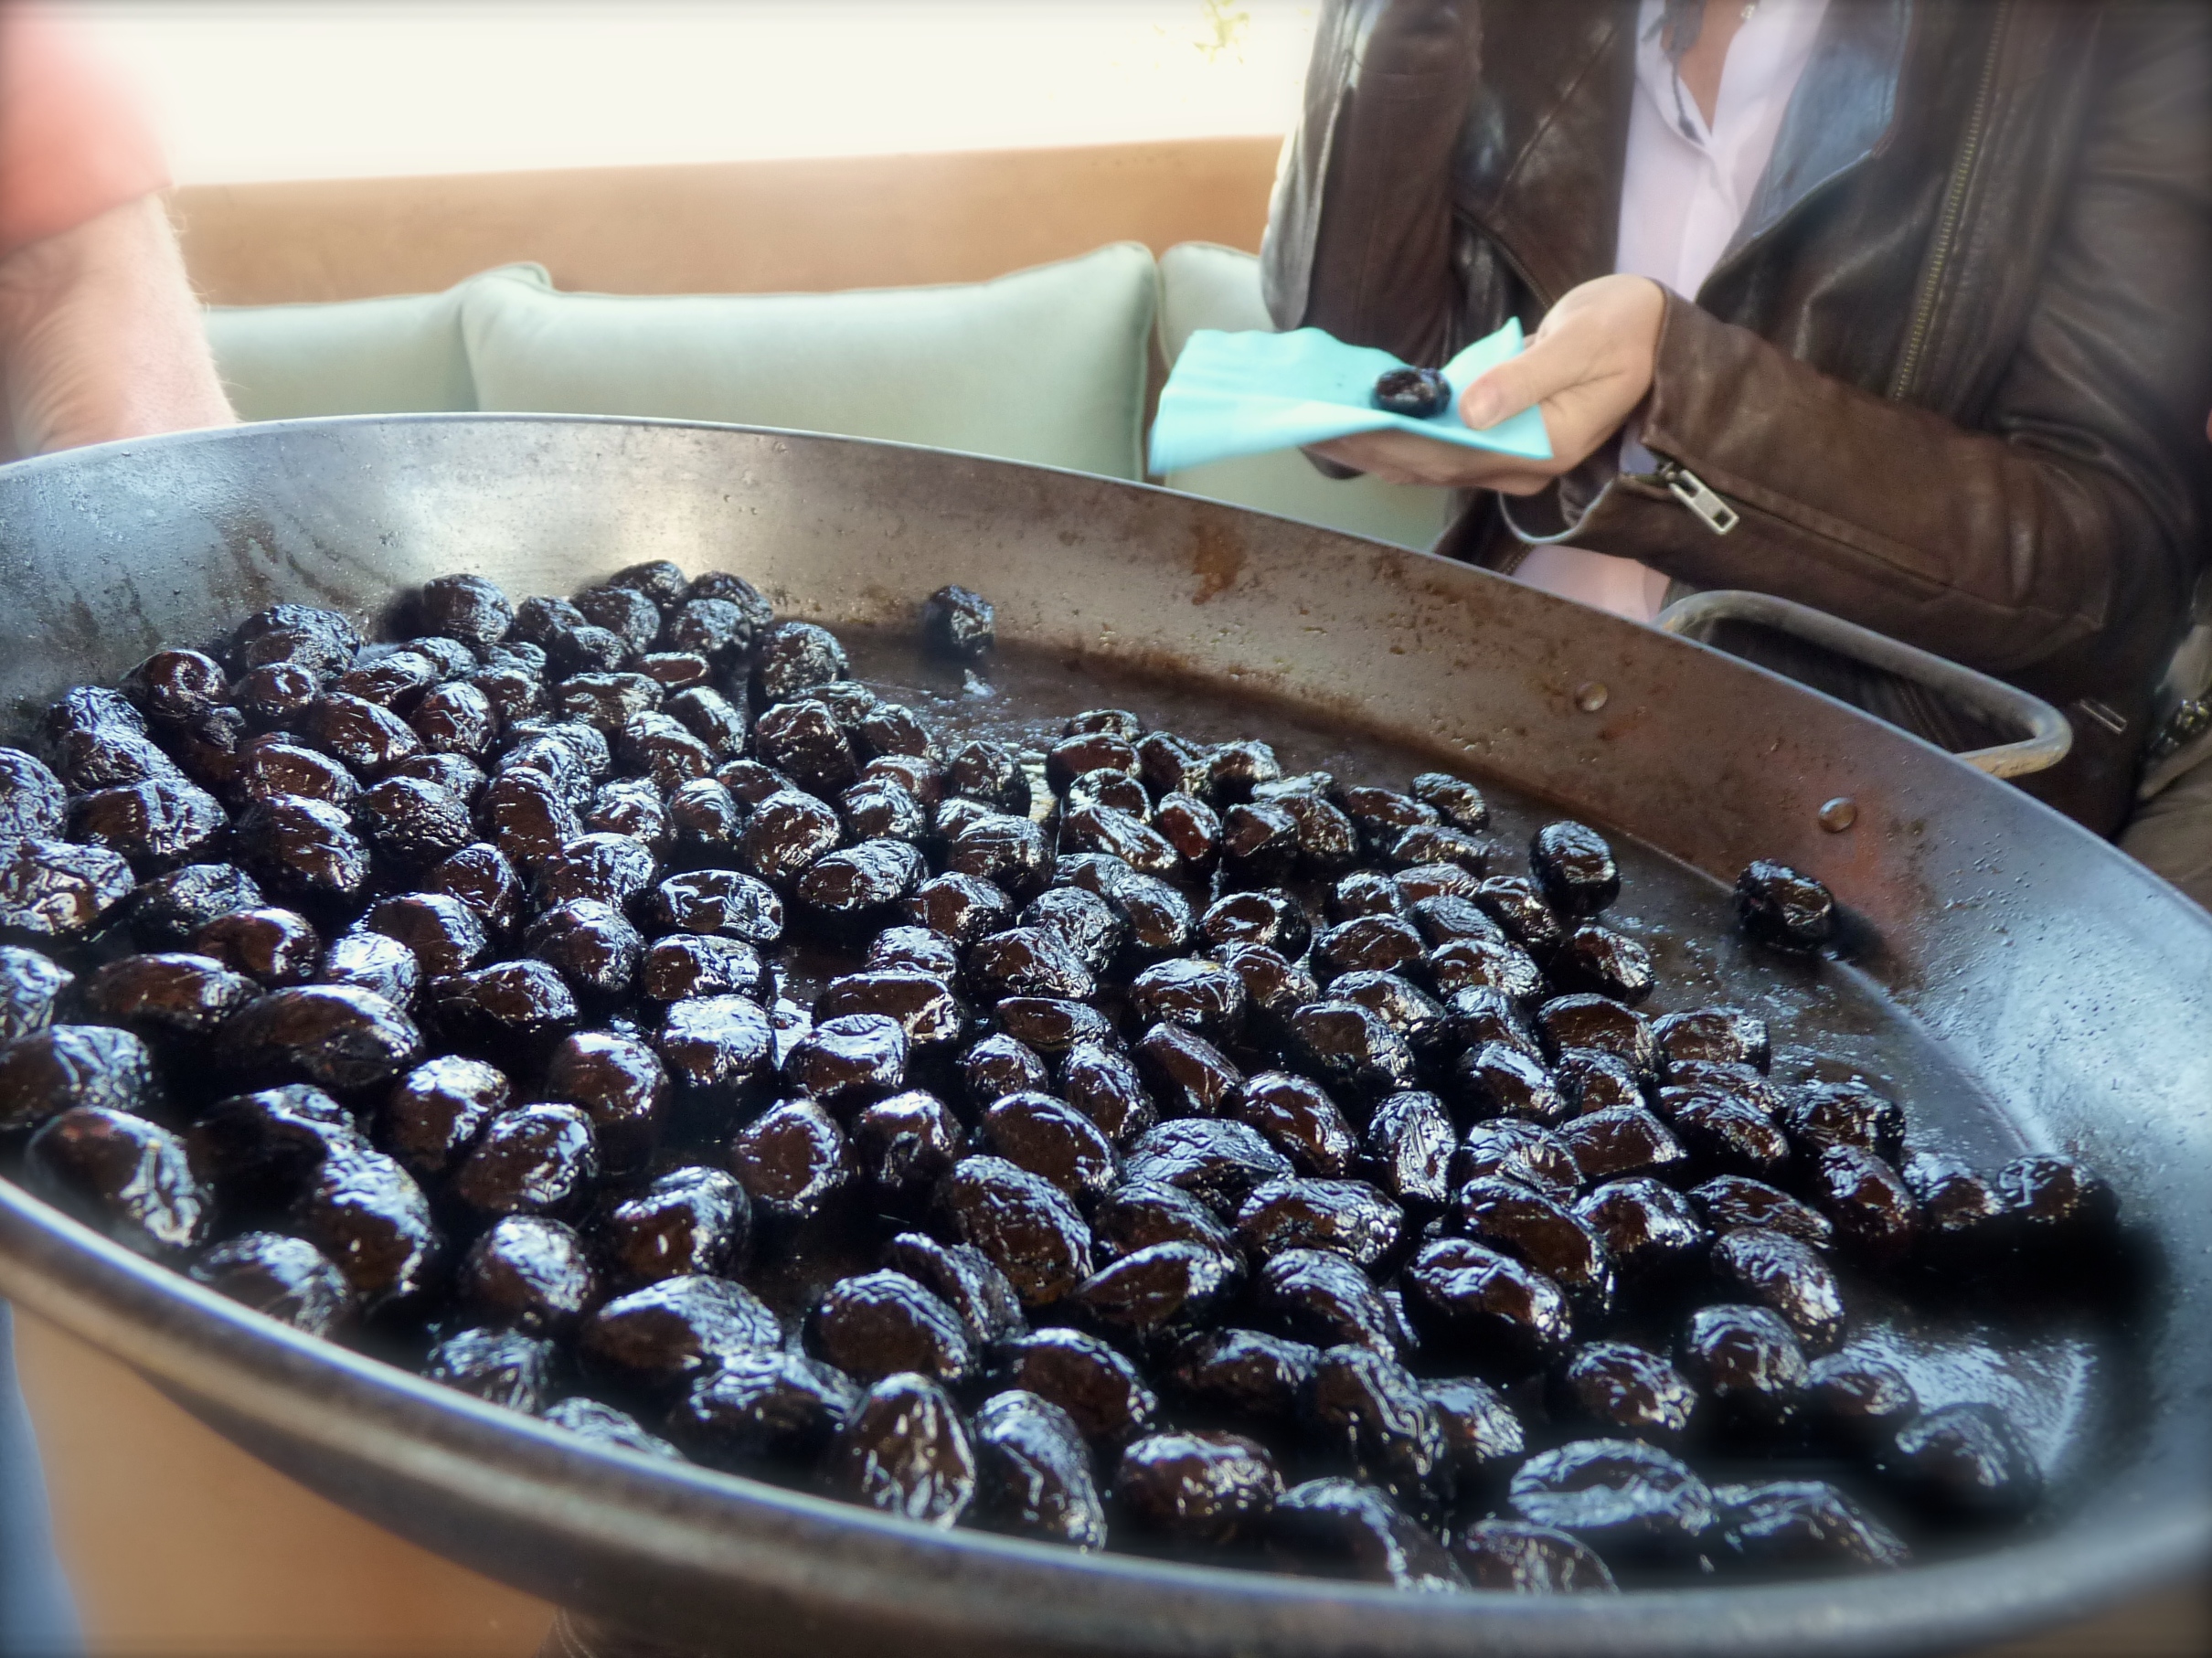 Casey's Olives, roasted in their outdoor oven